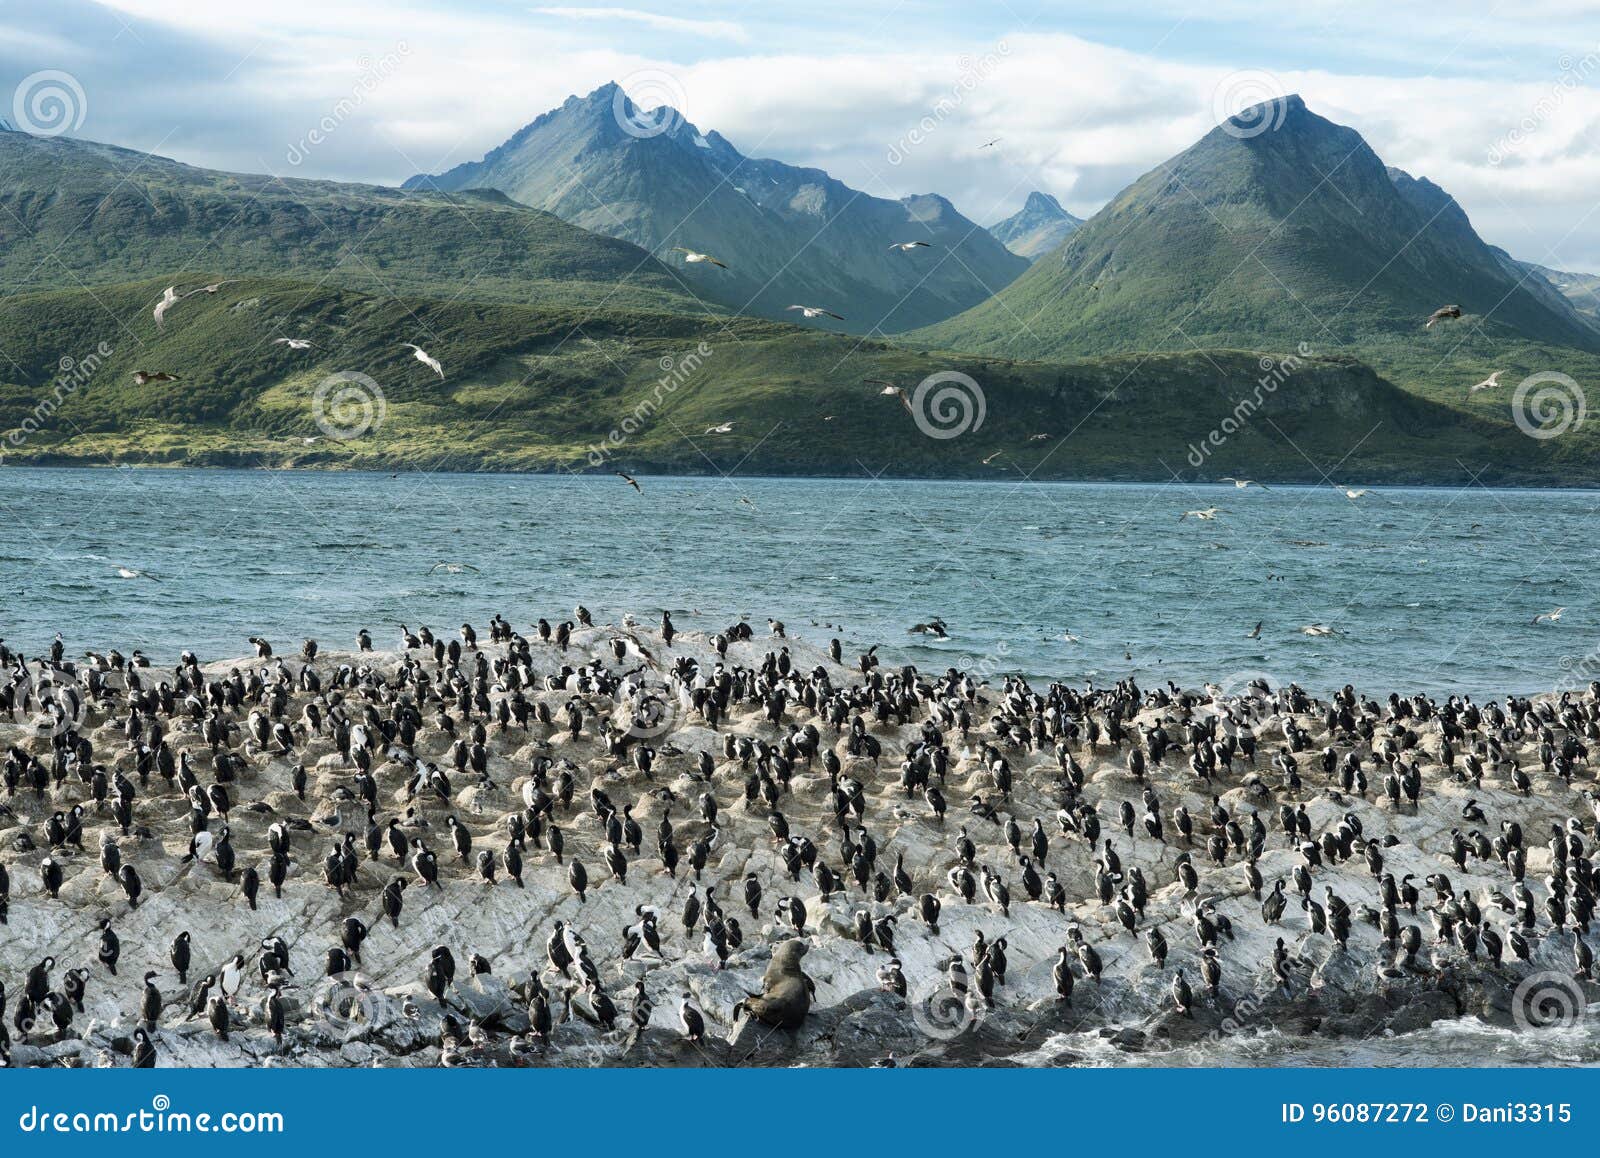 colony of king cormorants on ilha dos passaros located on the beagle channel, tierra del fuego